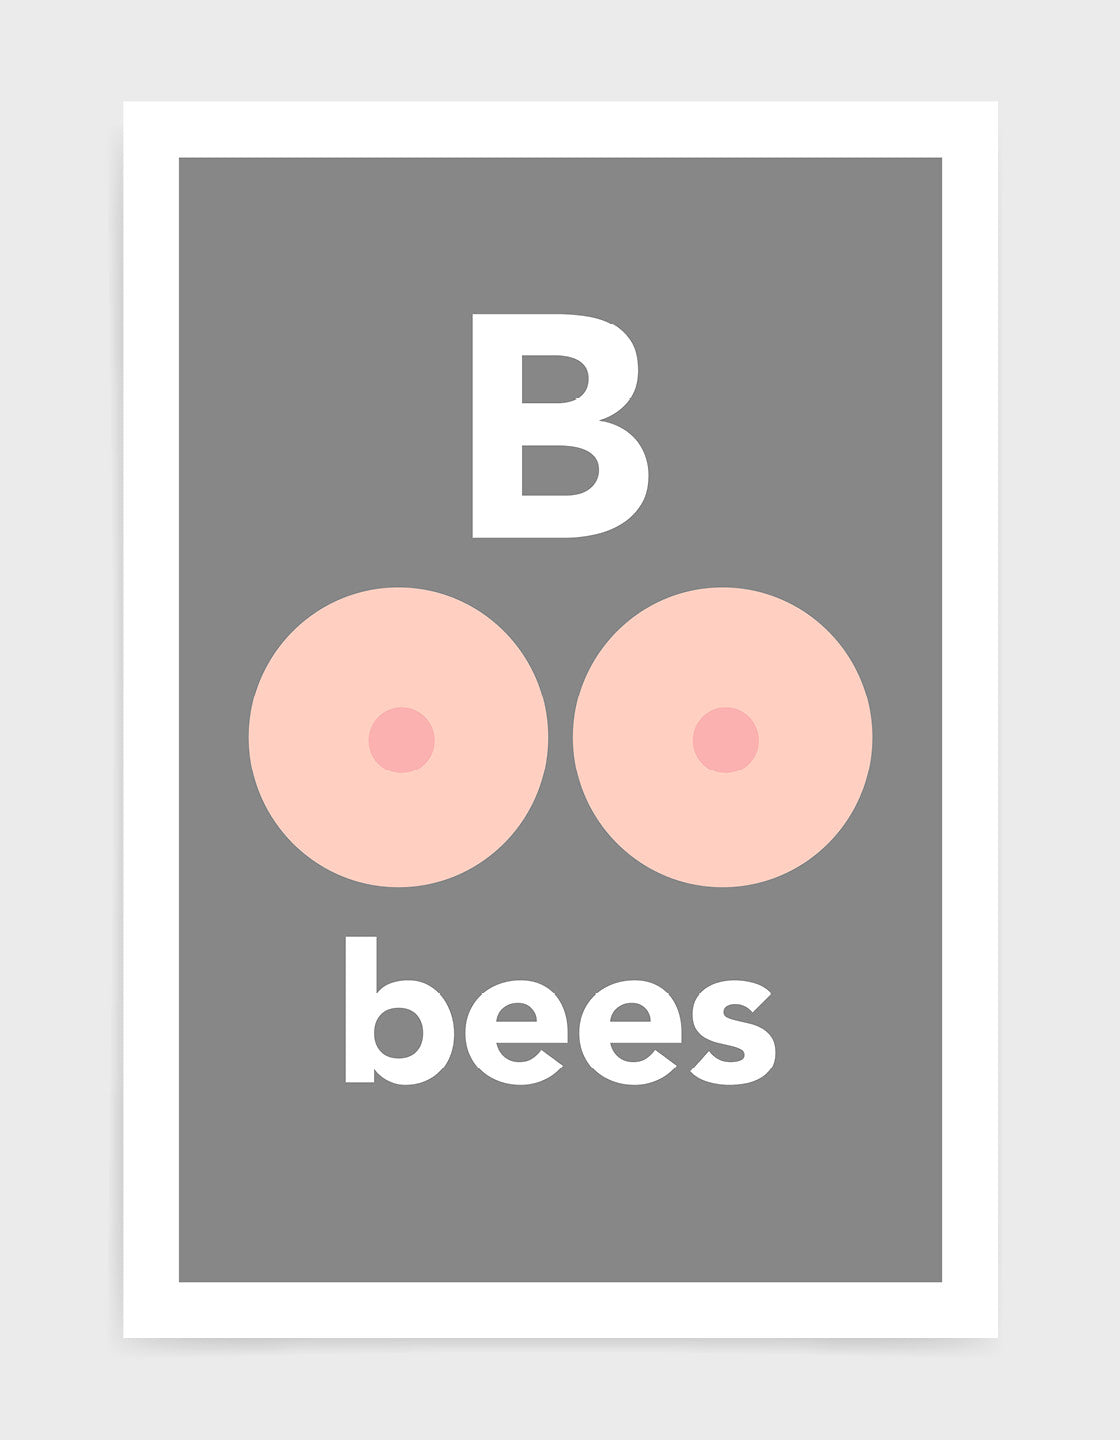 Boobies typogrphy print - pink background with B OO Bees